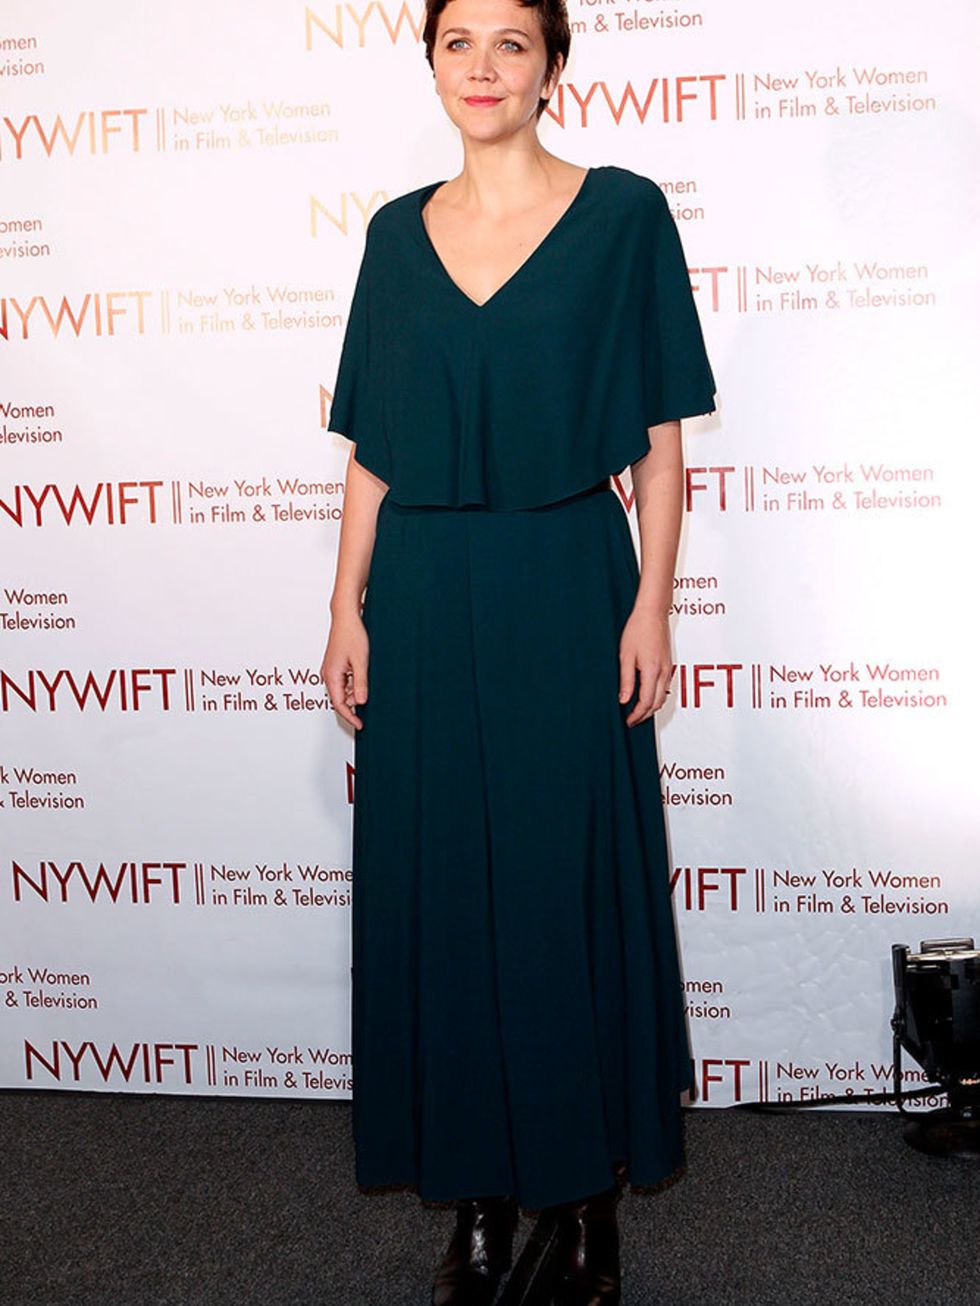 Maggie Gyllenhaal at the annual Women in Film and Television celebration in New york, December 2014.